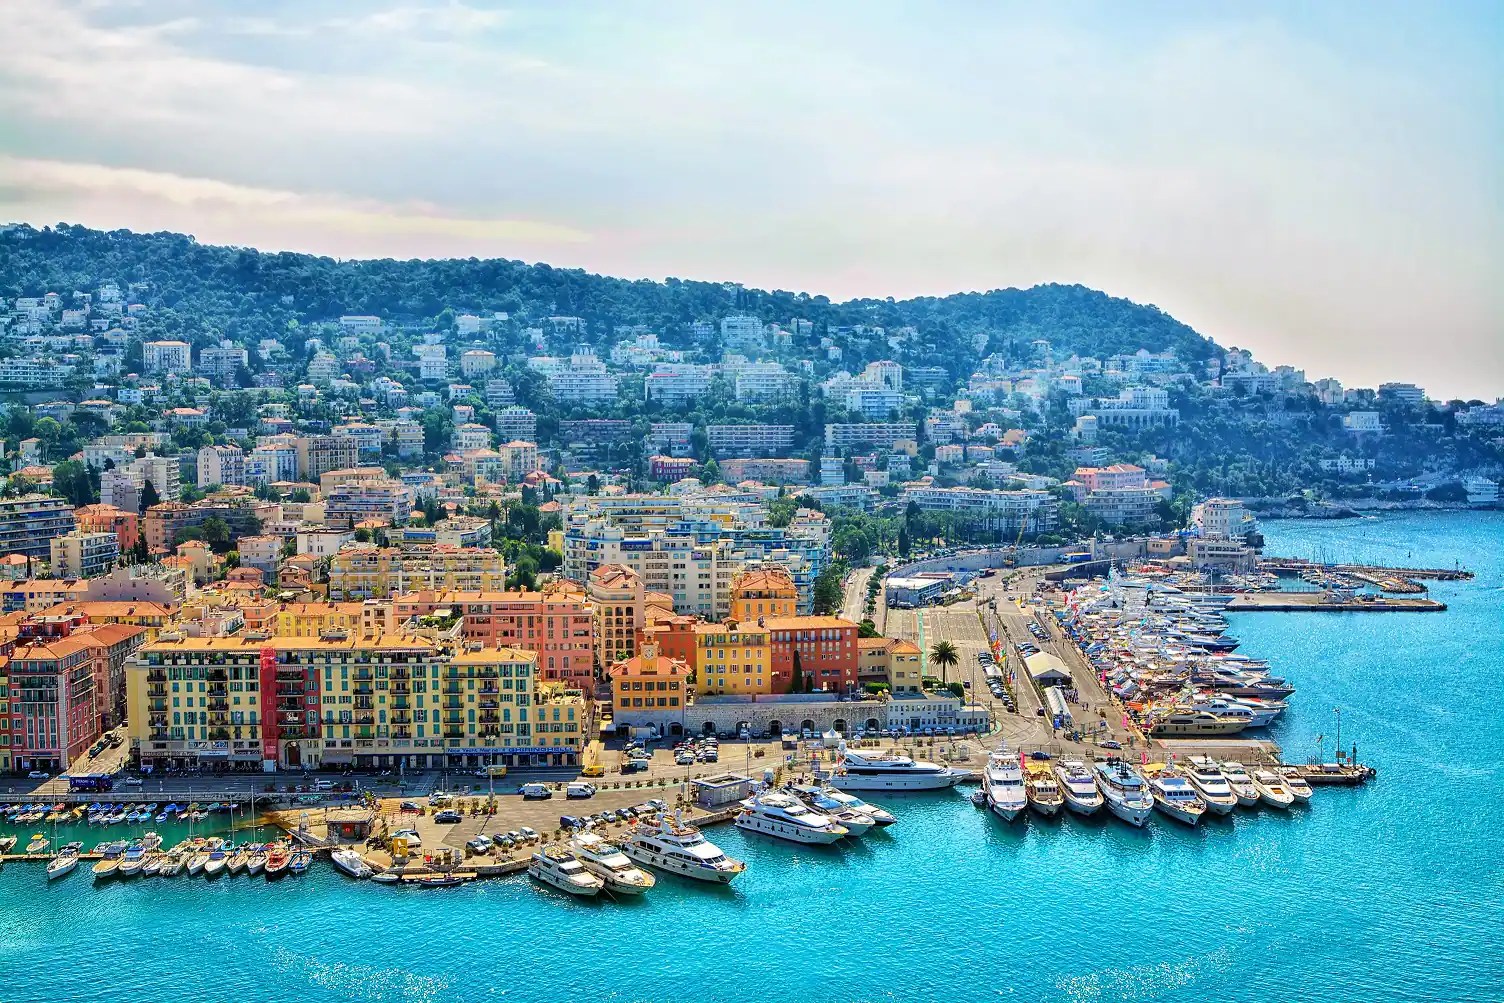 Etihad will fly to Nice in summer 2022